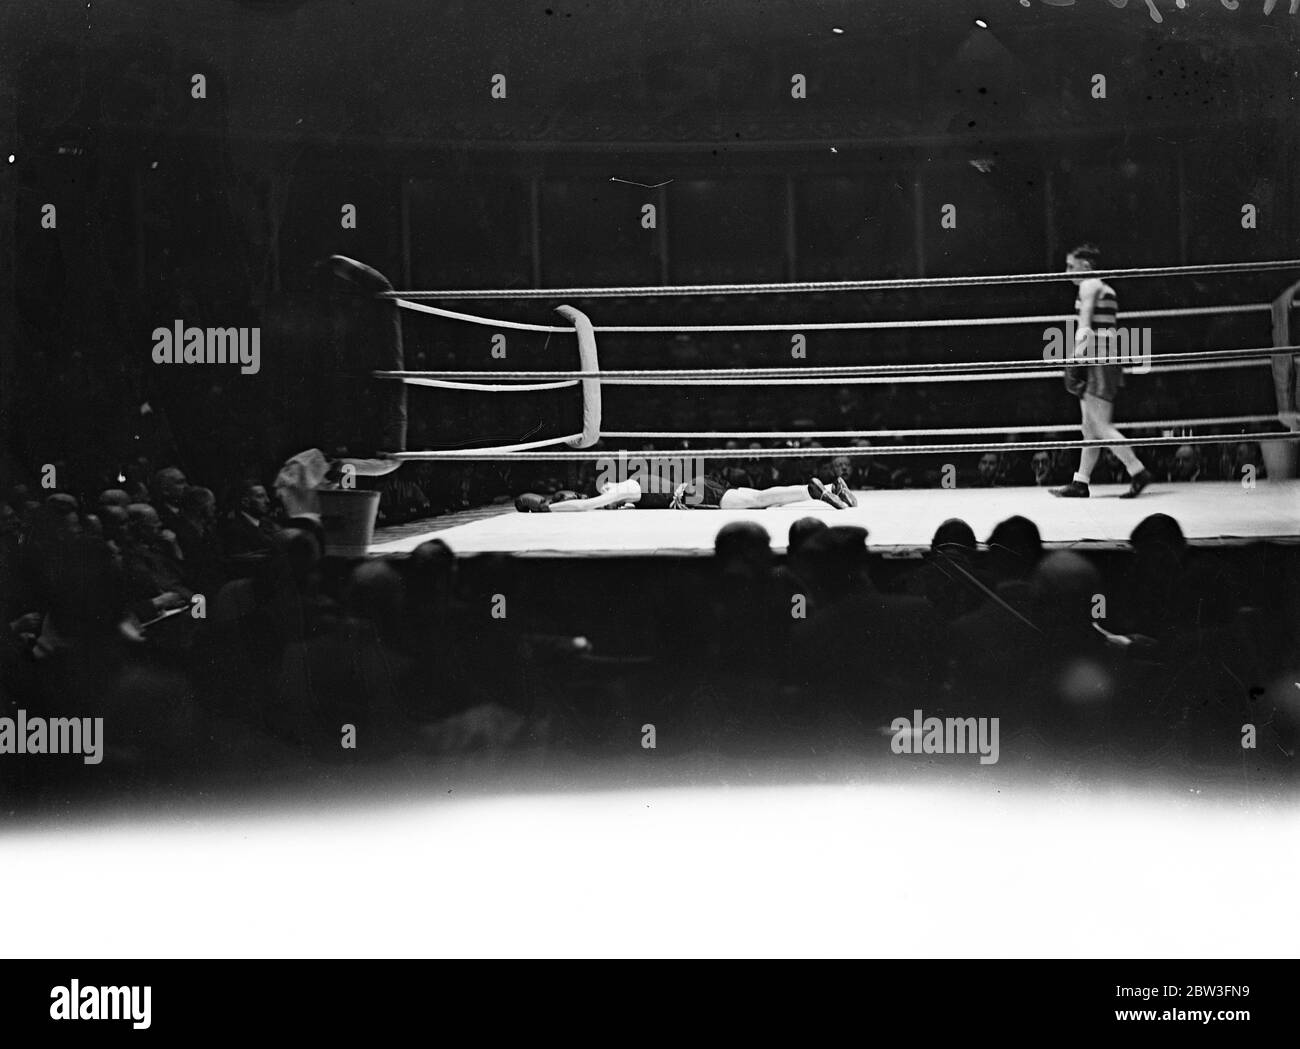 Amateur boxing Black and White Stock Photos and Images photo